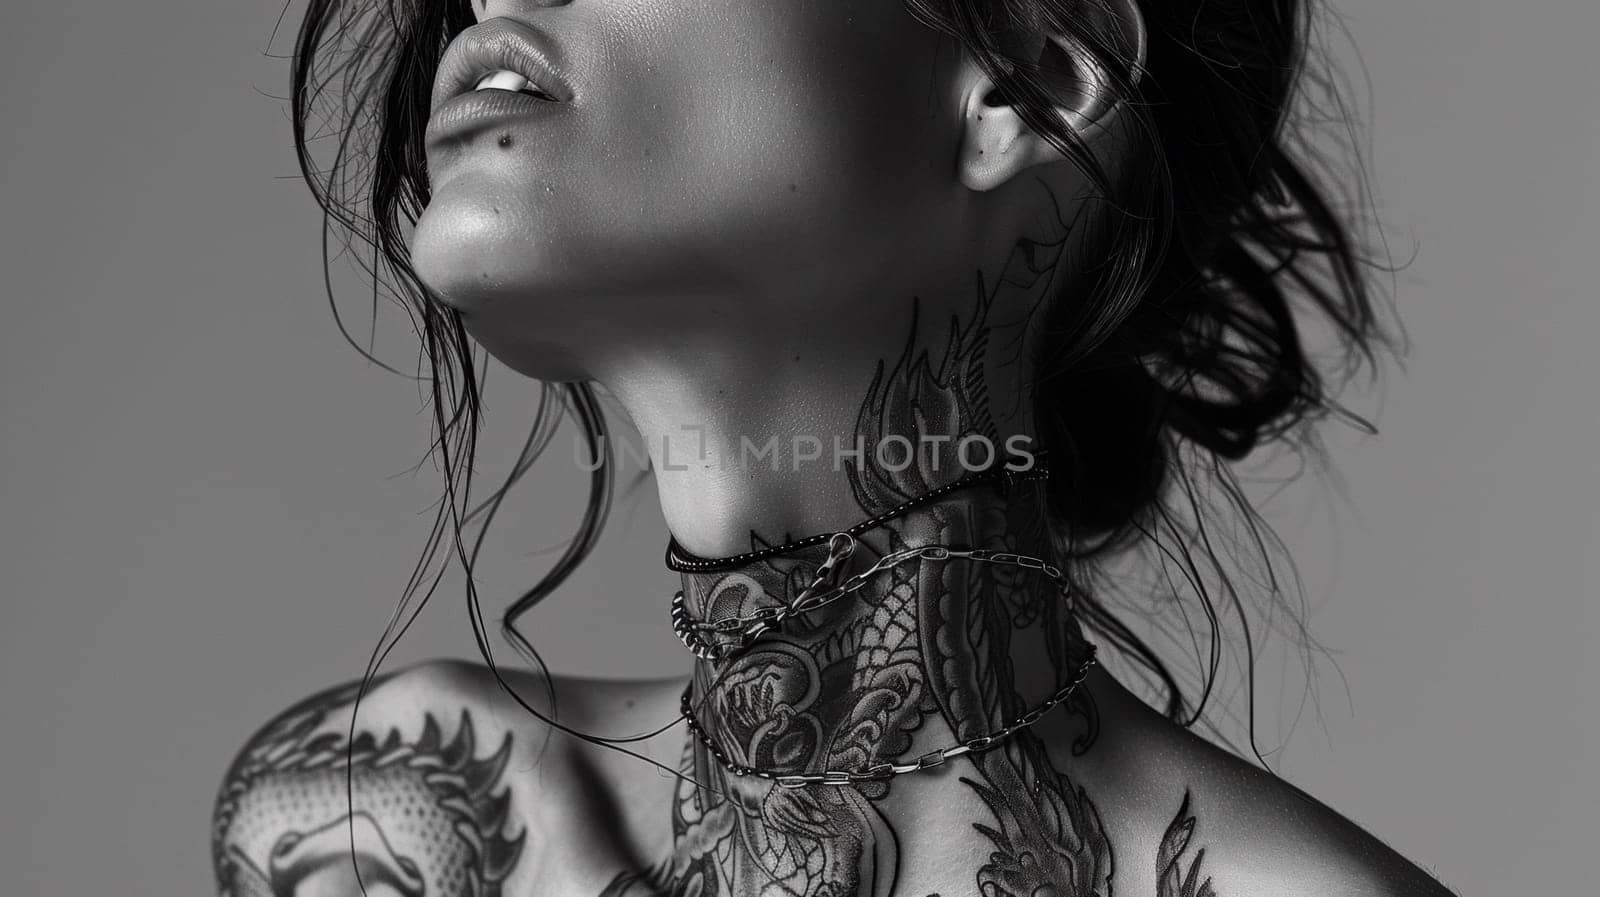 A woman with a neck piece and tattoos on her body, AI by starush